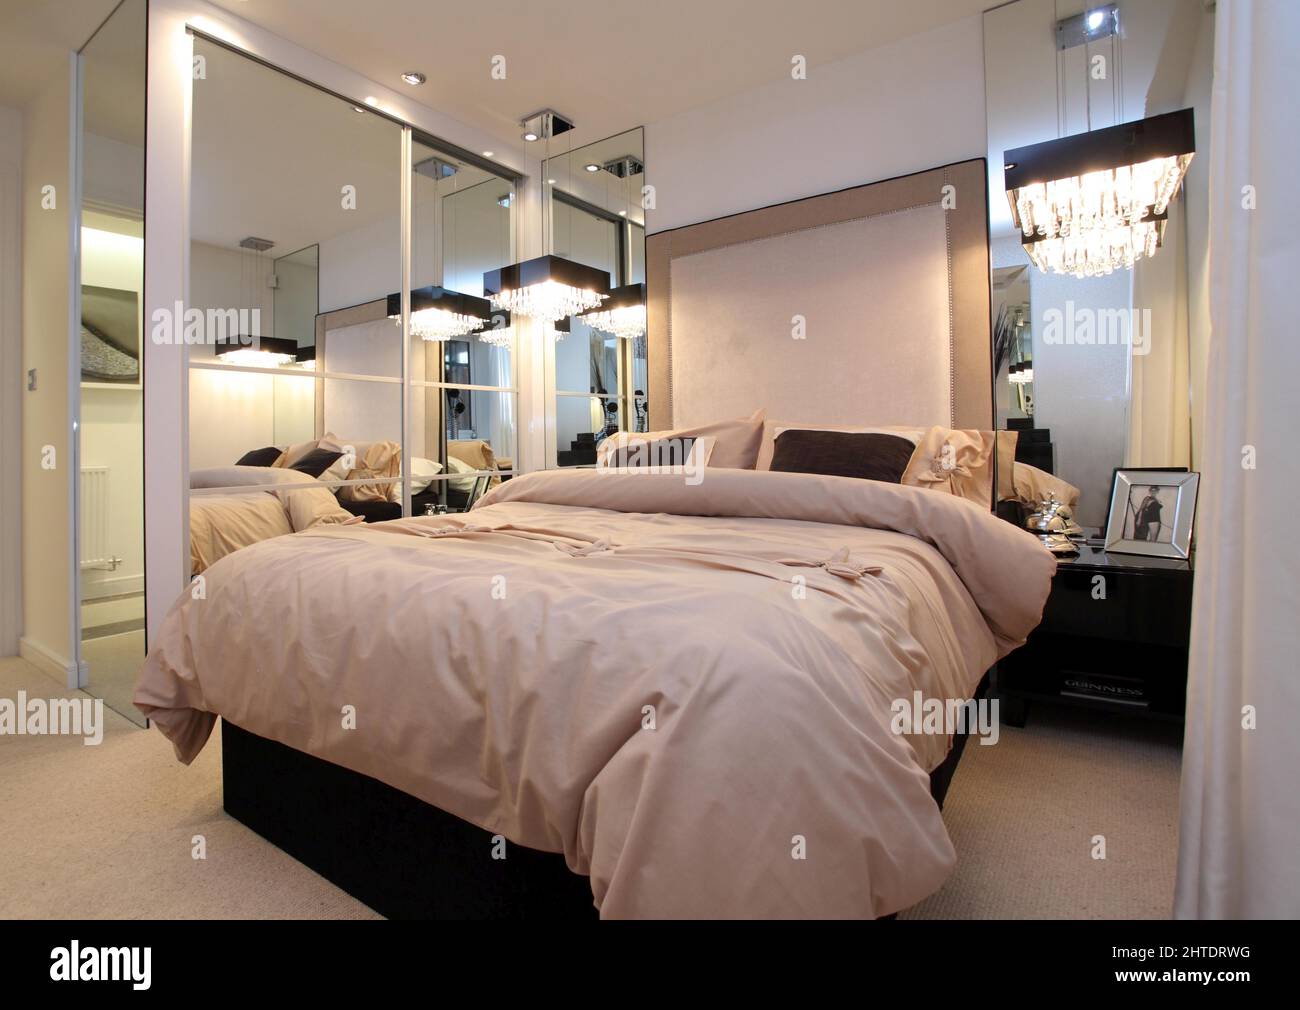 Modern bedroom in new build home,bedspread,padded headboard, mirror mirrored wardrobes,beige white cream neutral colour scheme, large mirrors increase Stock Photo